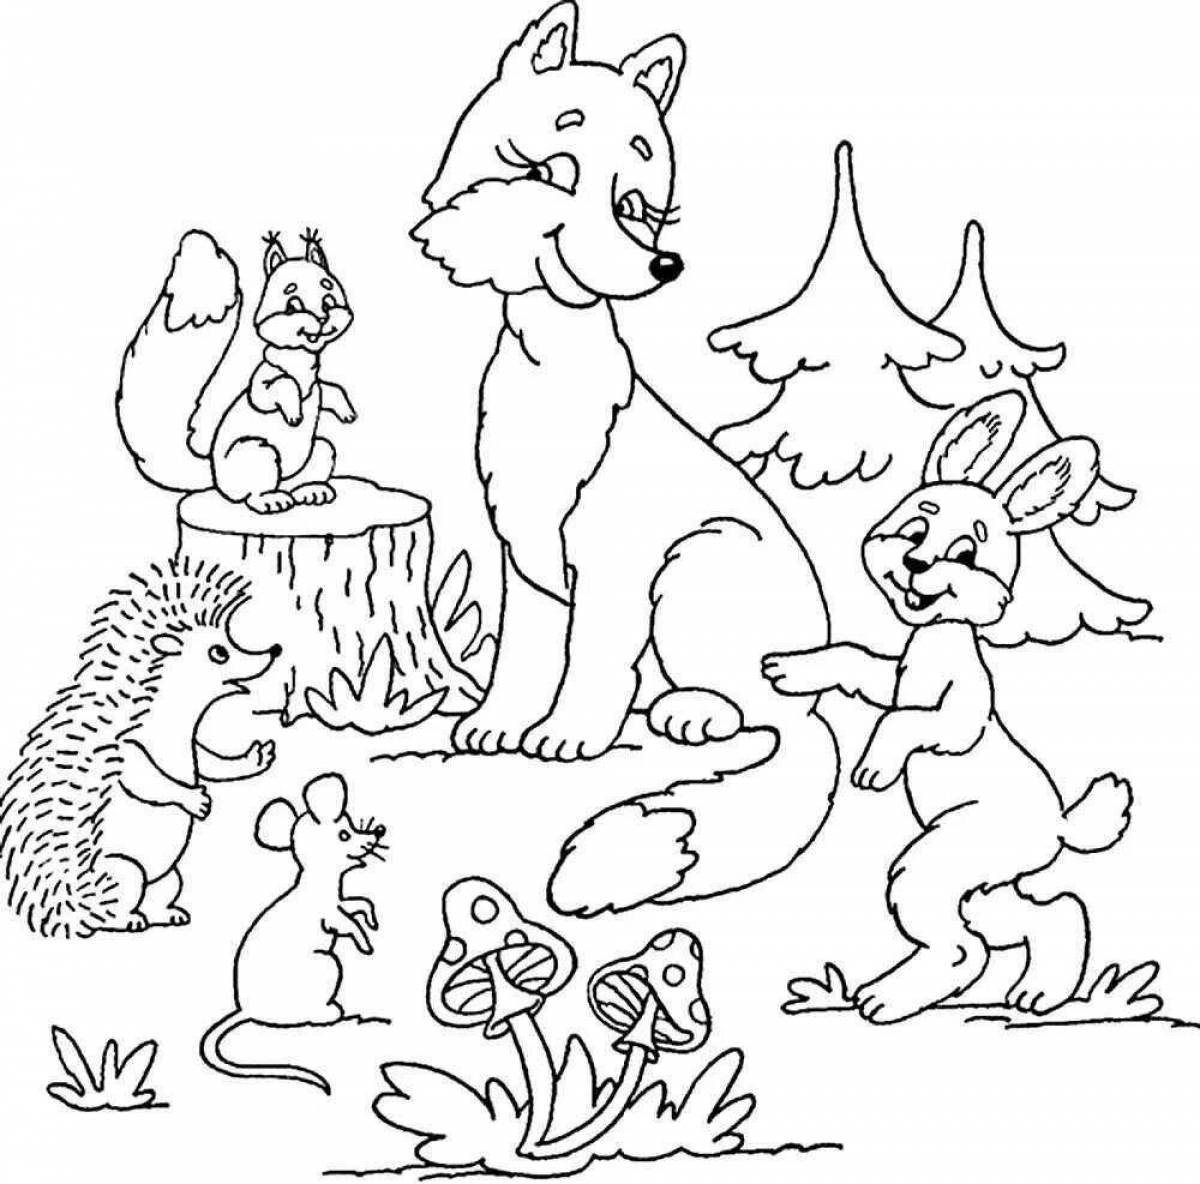 Outstanding forest animal coloring page for kids